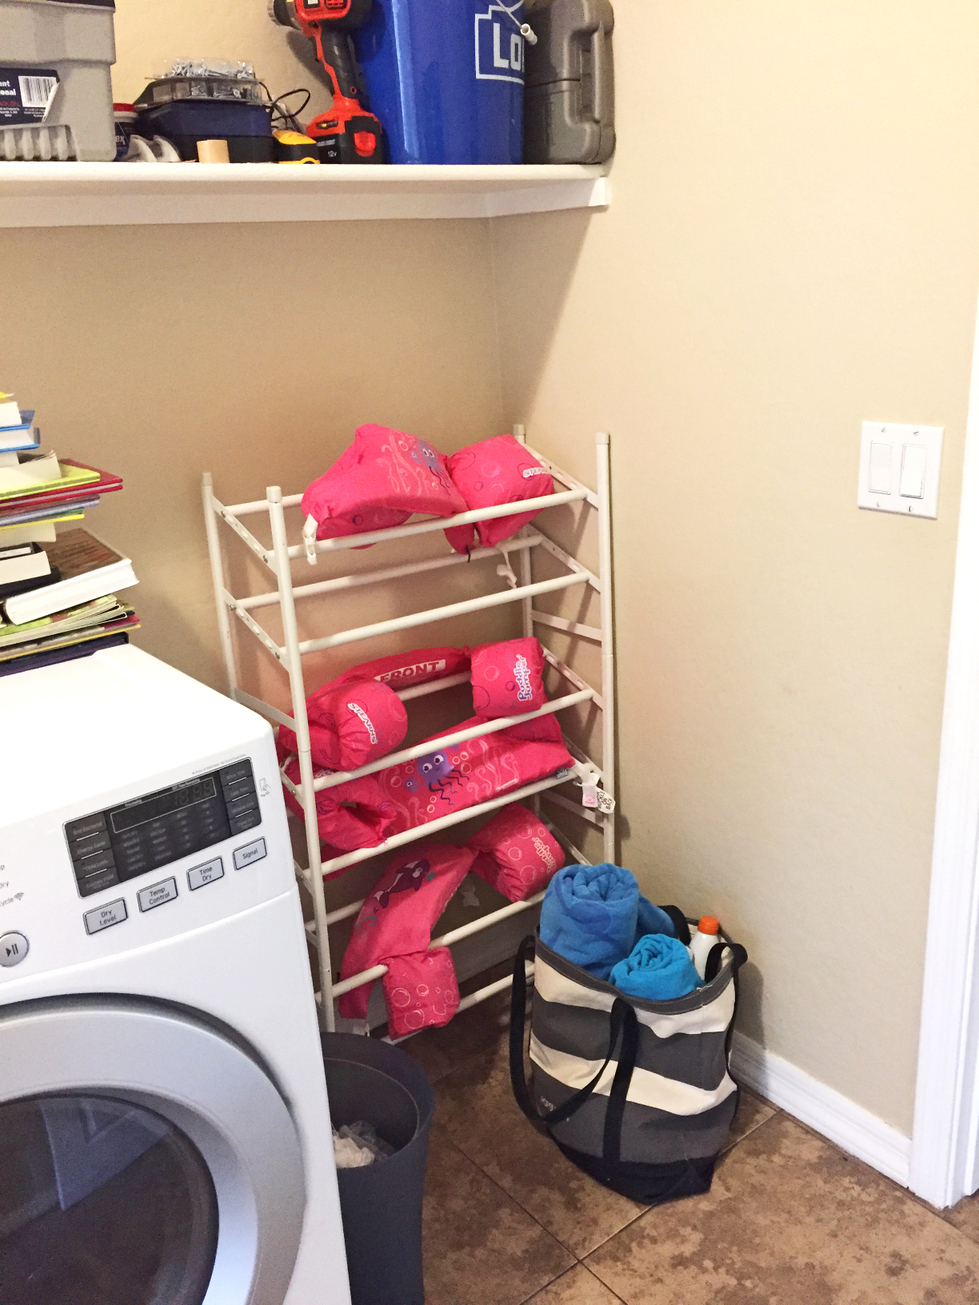 Update a totally boring laundry room